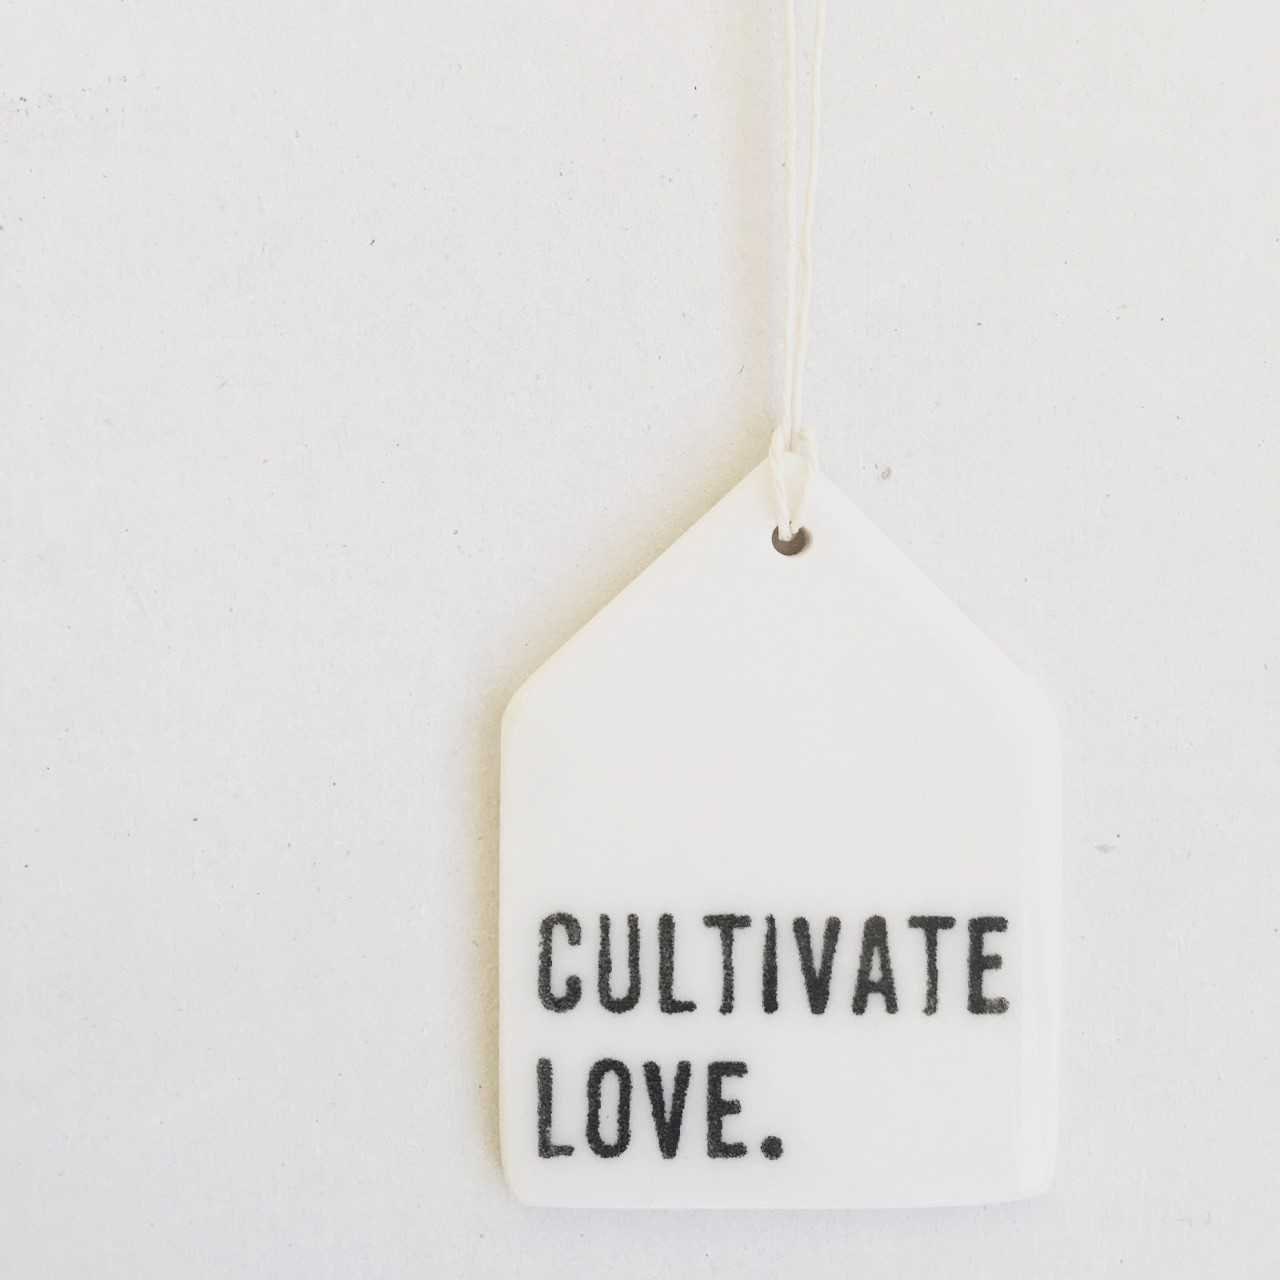 cultivate love | cultivate love quote | ceramic wall tag | ceramic wall art | minimalist design | home decor | meaningful gift